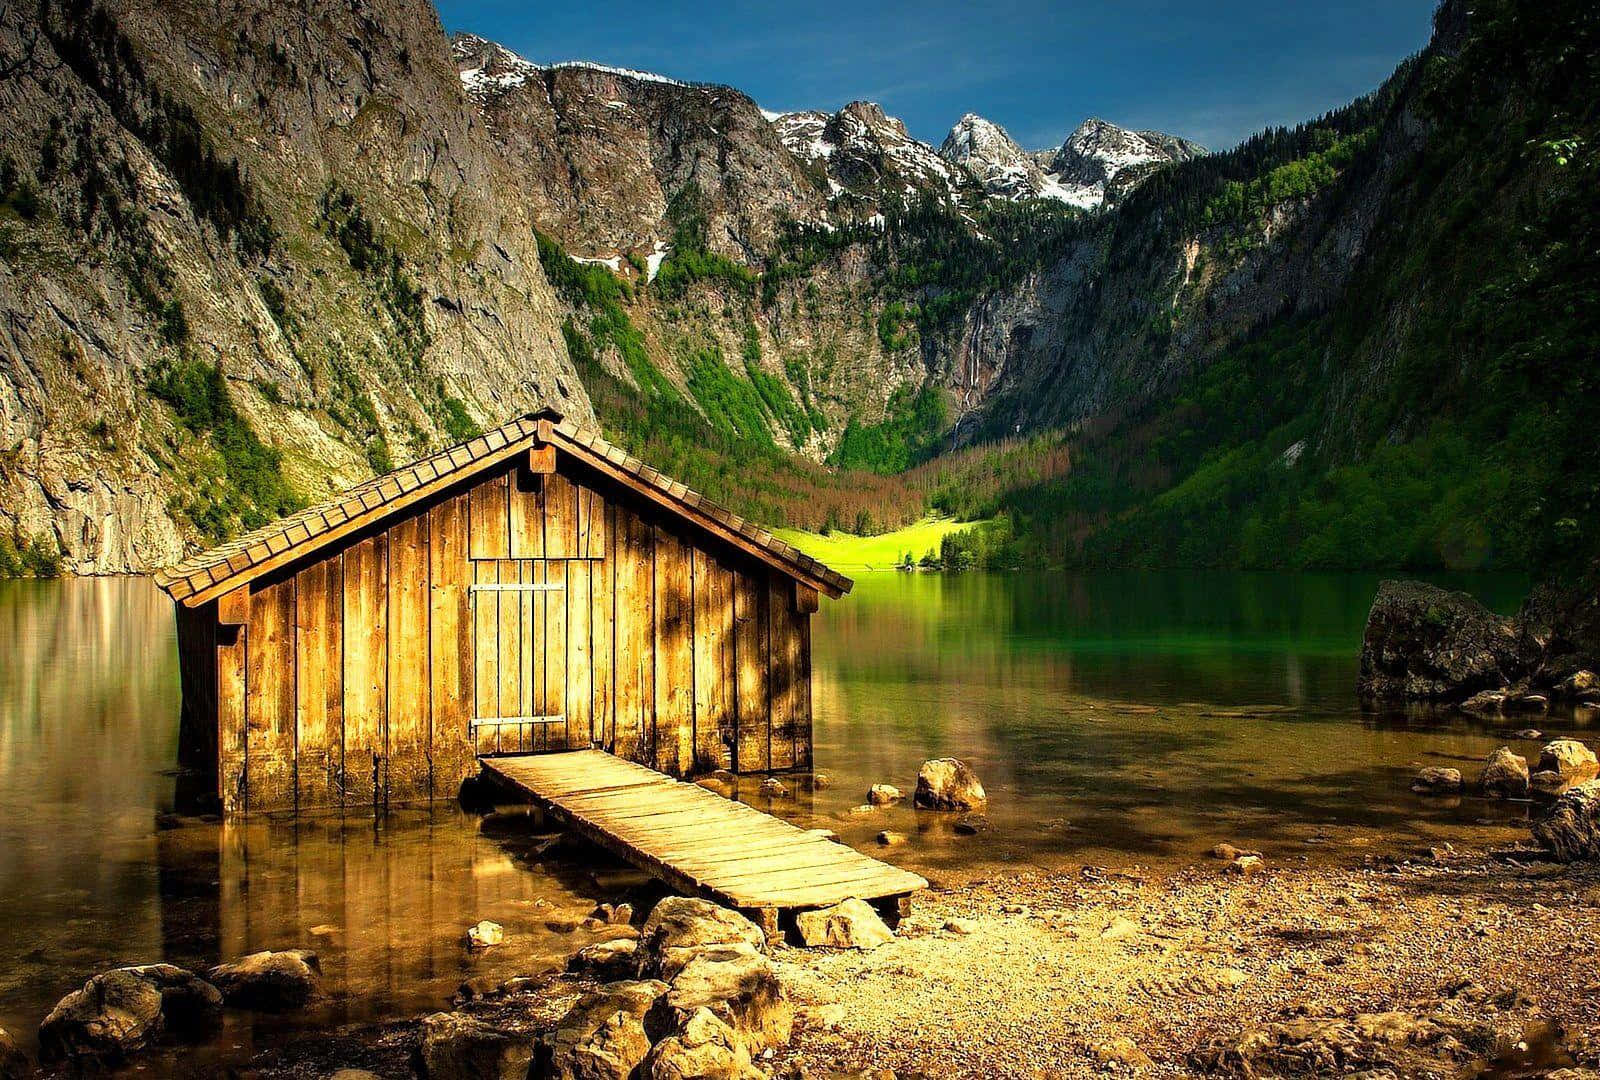 A Wooden Cabin Sits On The Shore Of A Lake